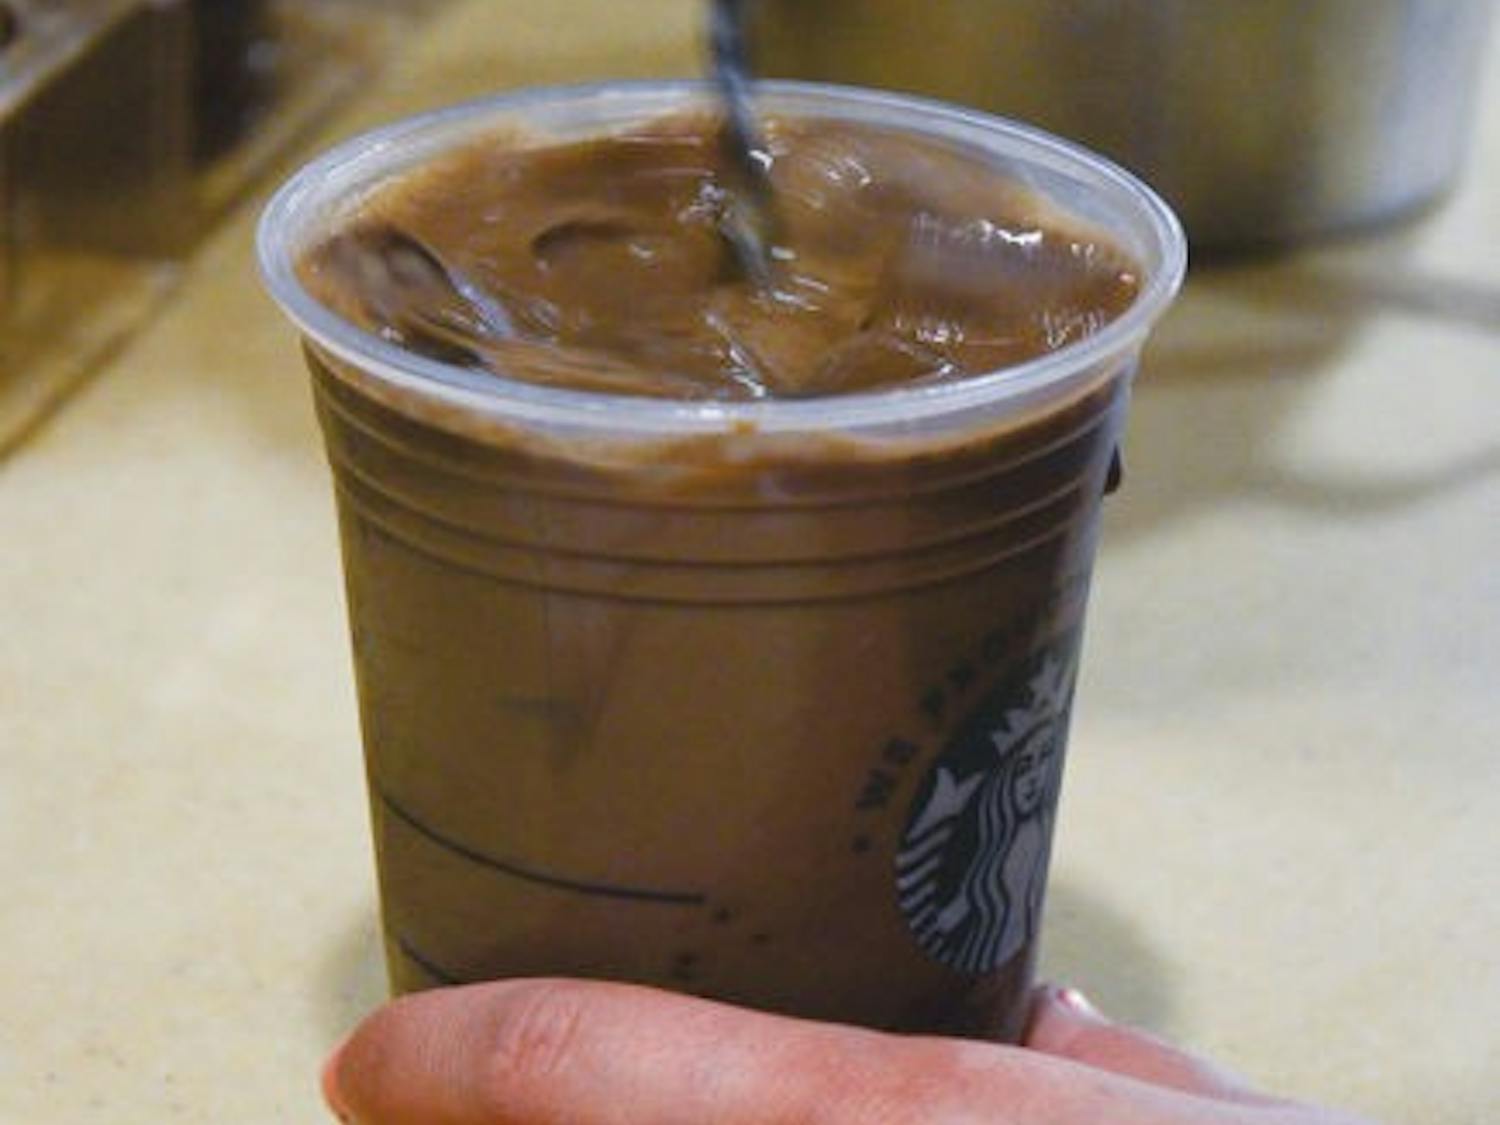 Students across campus can now feel better about their caffeine habits  